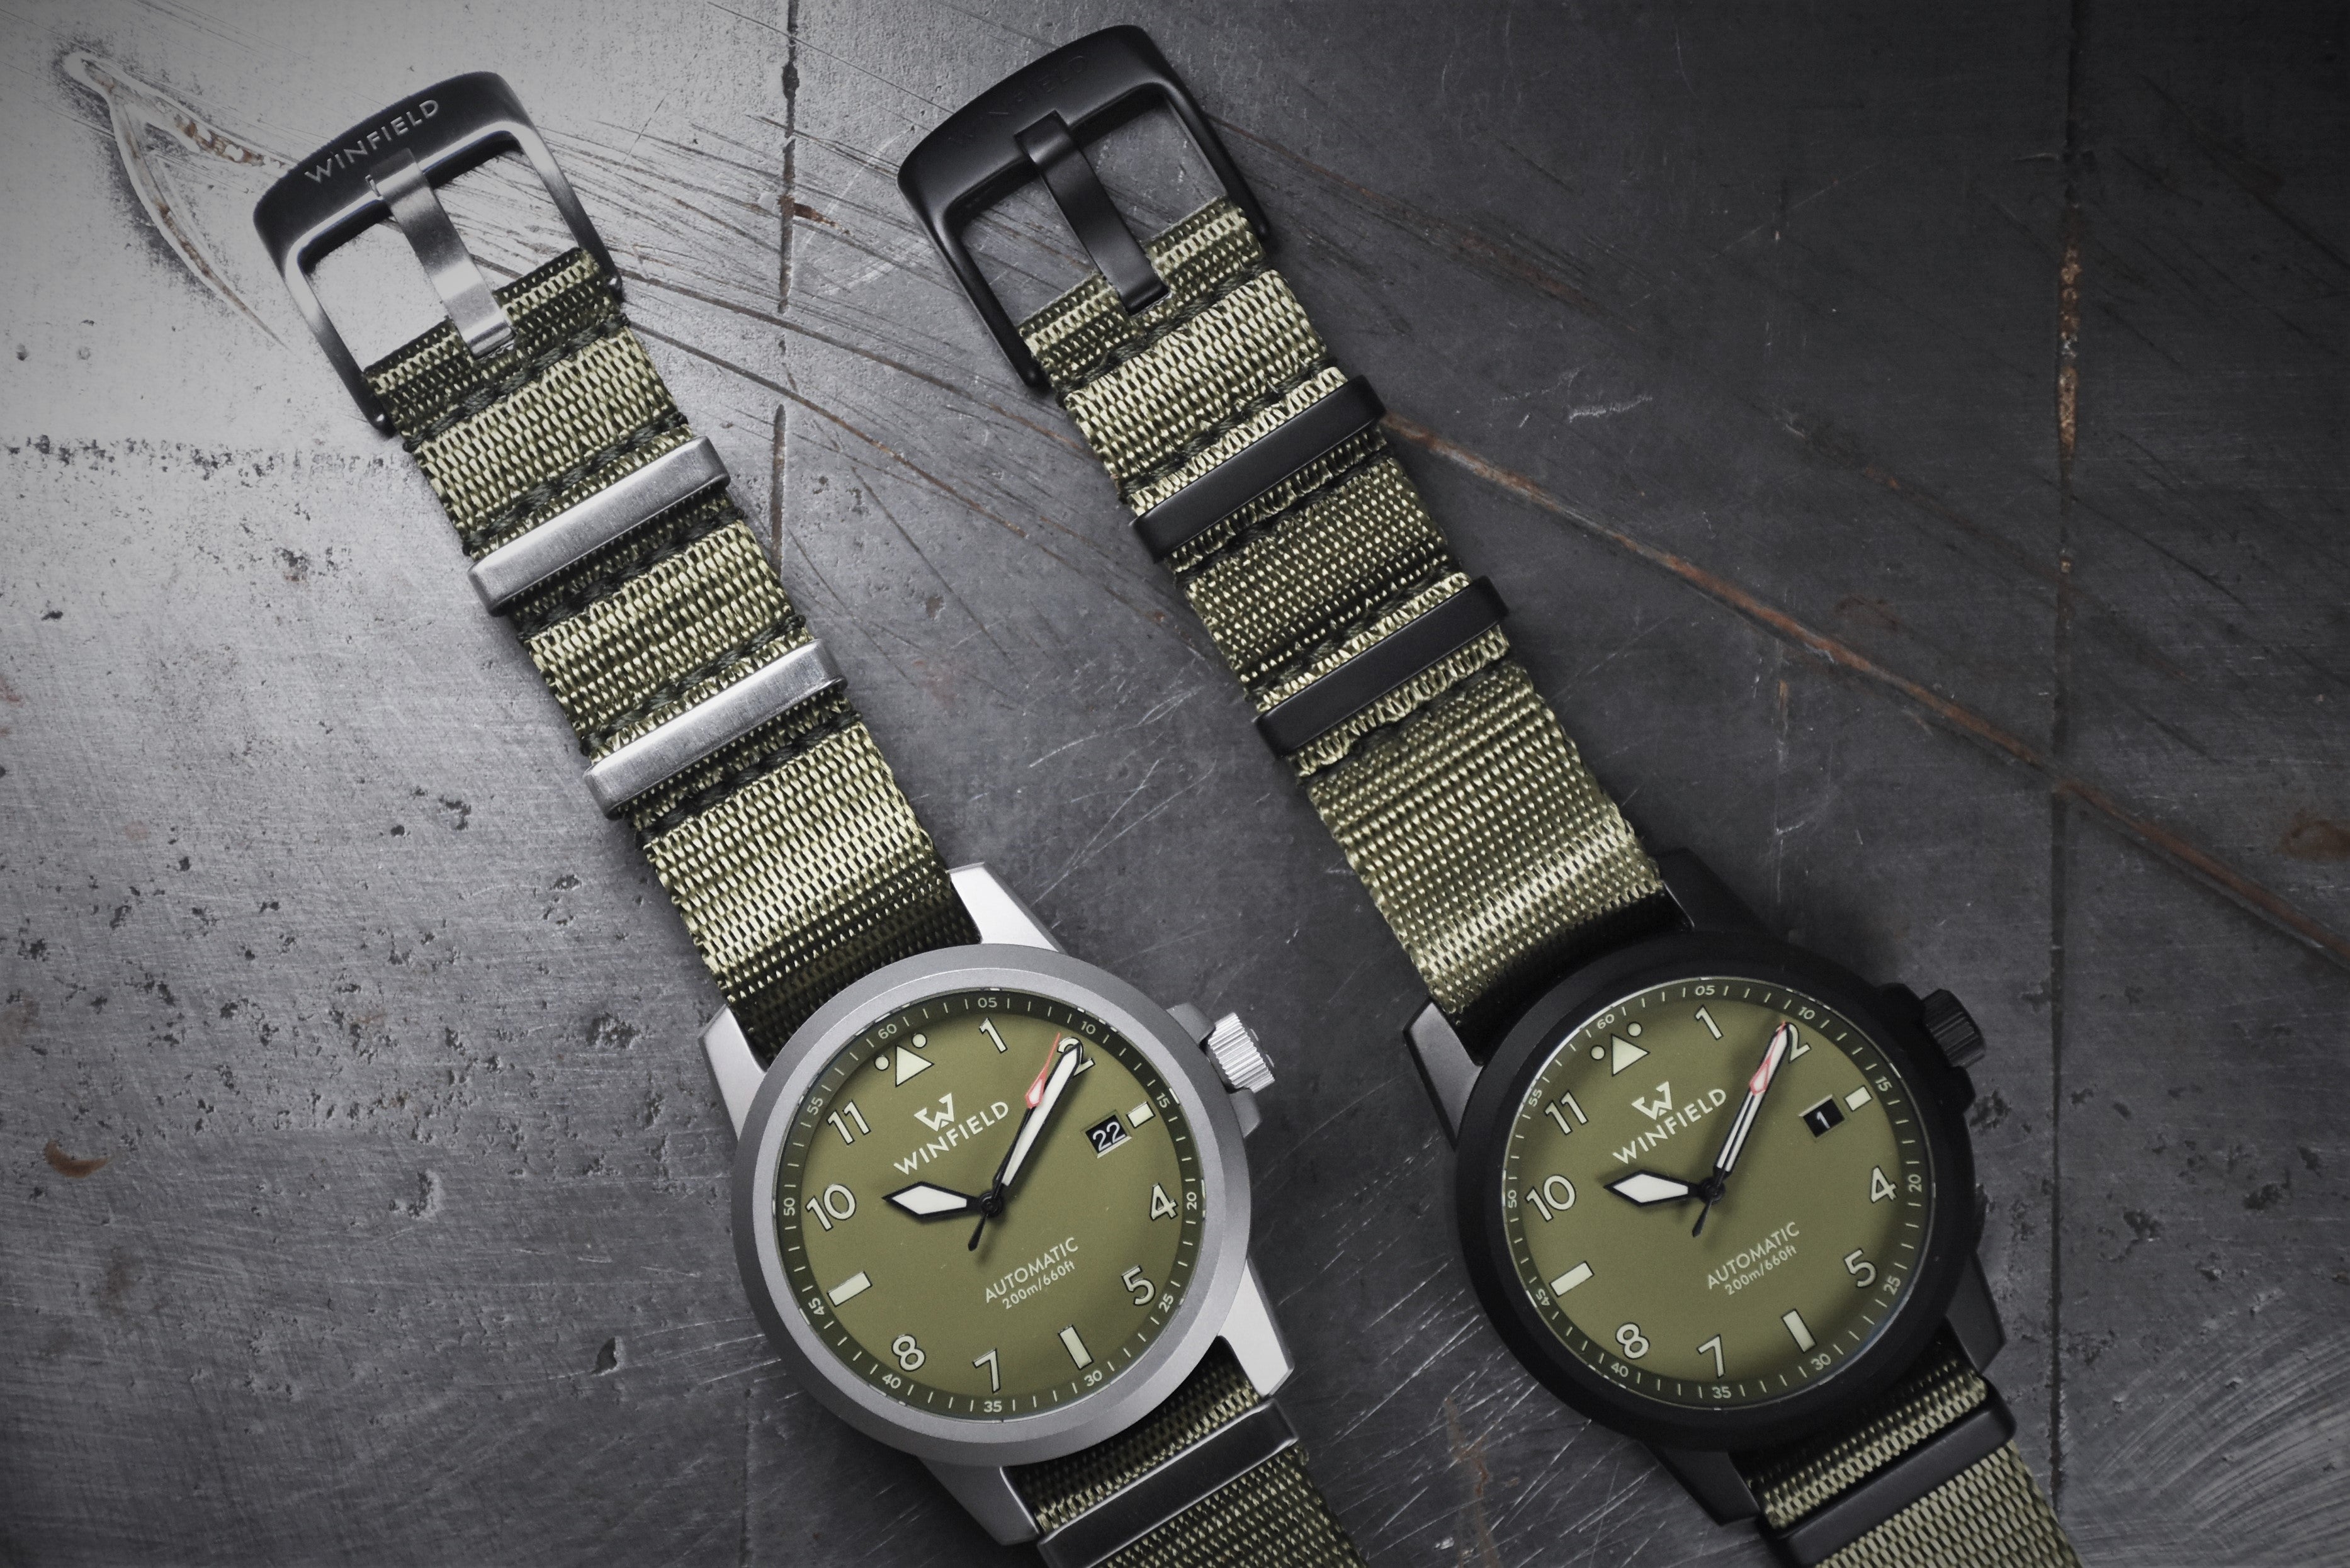 Winfield Field Lead is a true field watch.  Automatic movement and 200m water resistance.